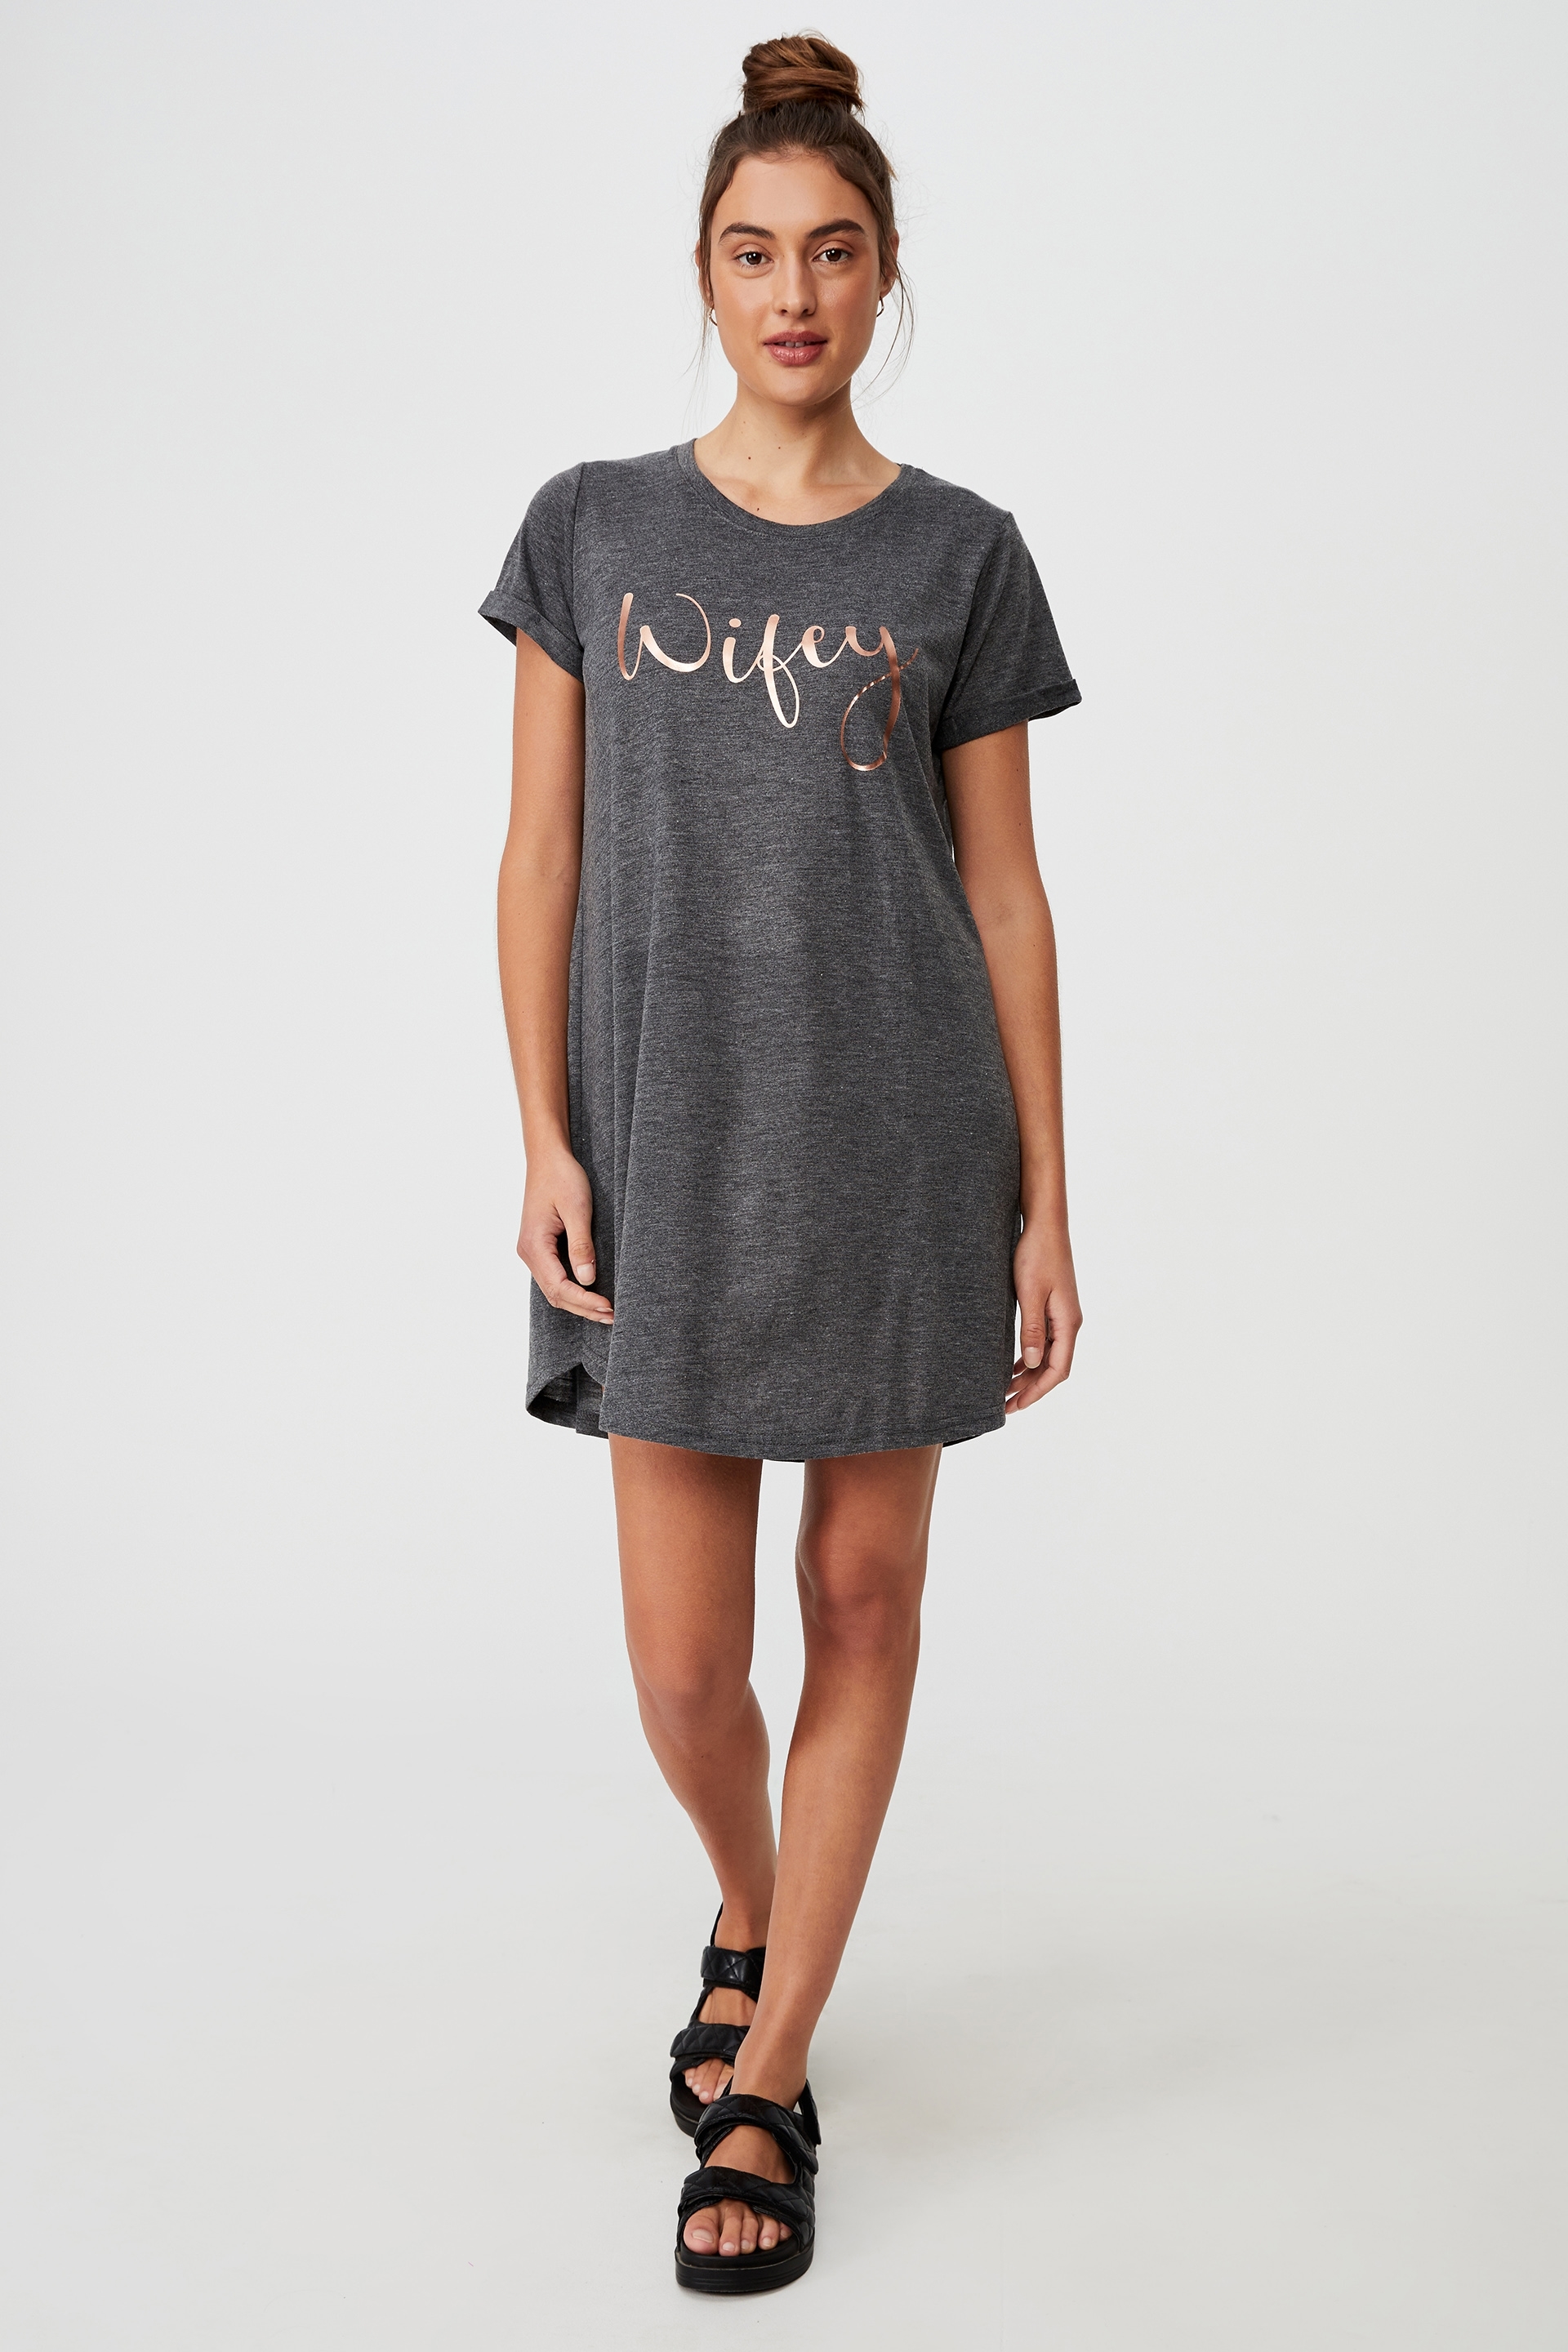 Cotton On Women - Personalised Tina Tshirt Dress - Charcoal marle